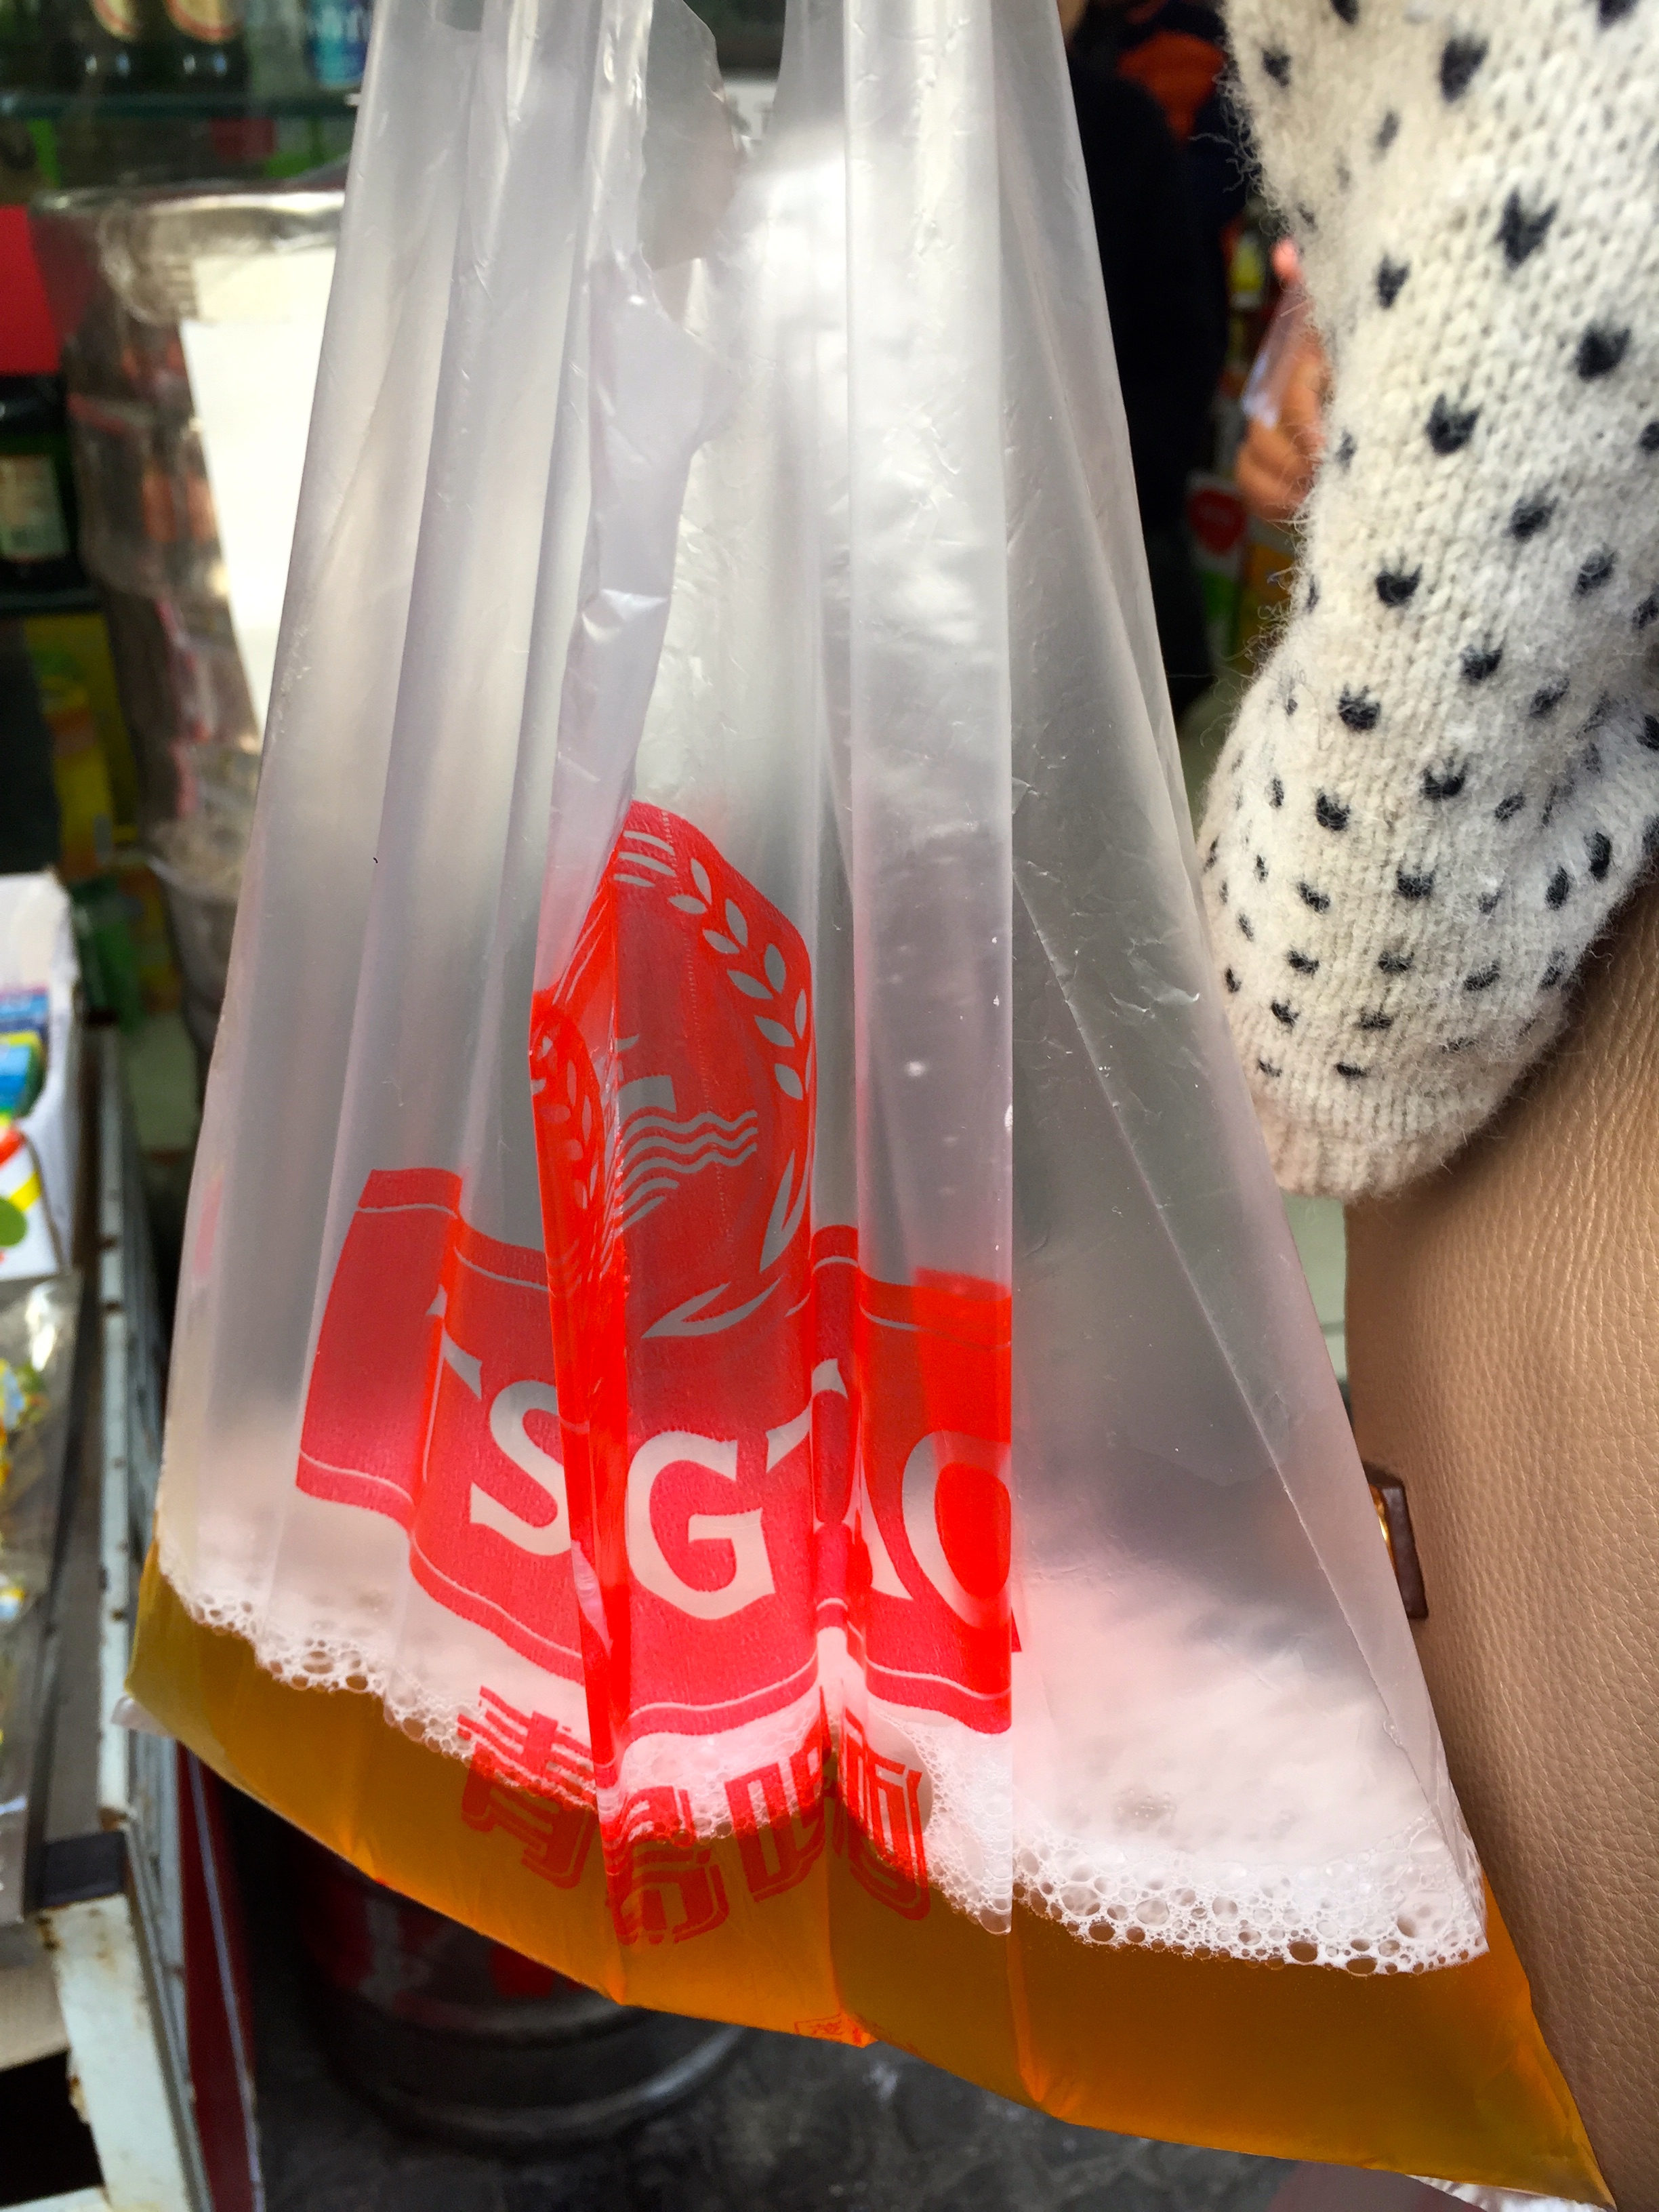 If you were ever curious about what a plastic bag filled with beer looked like, wonder no more. 